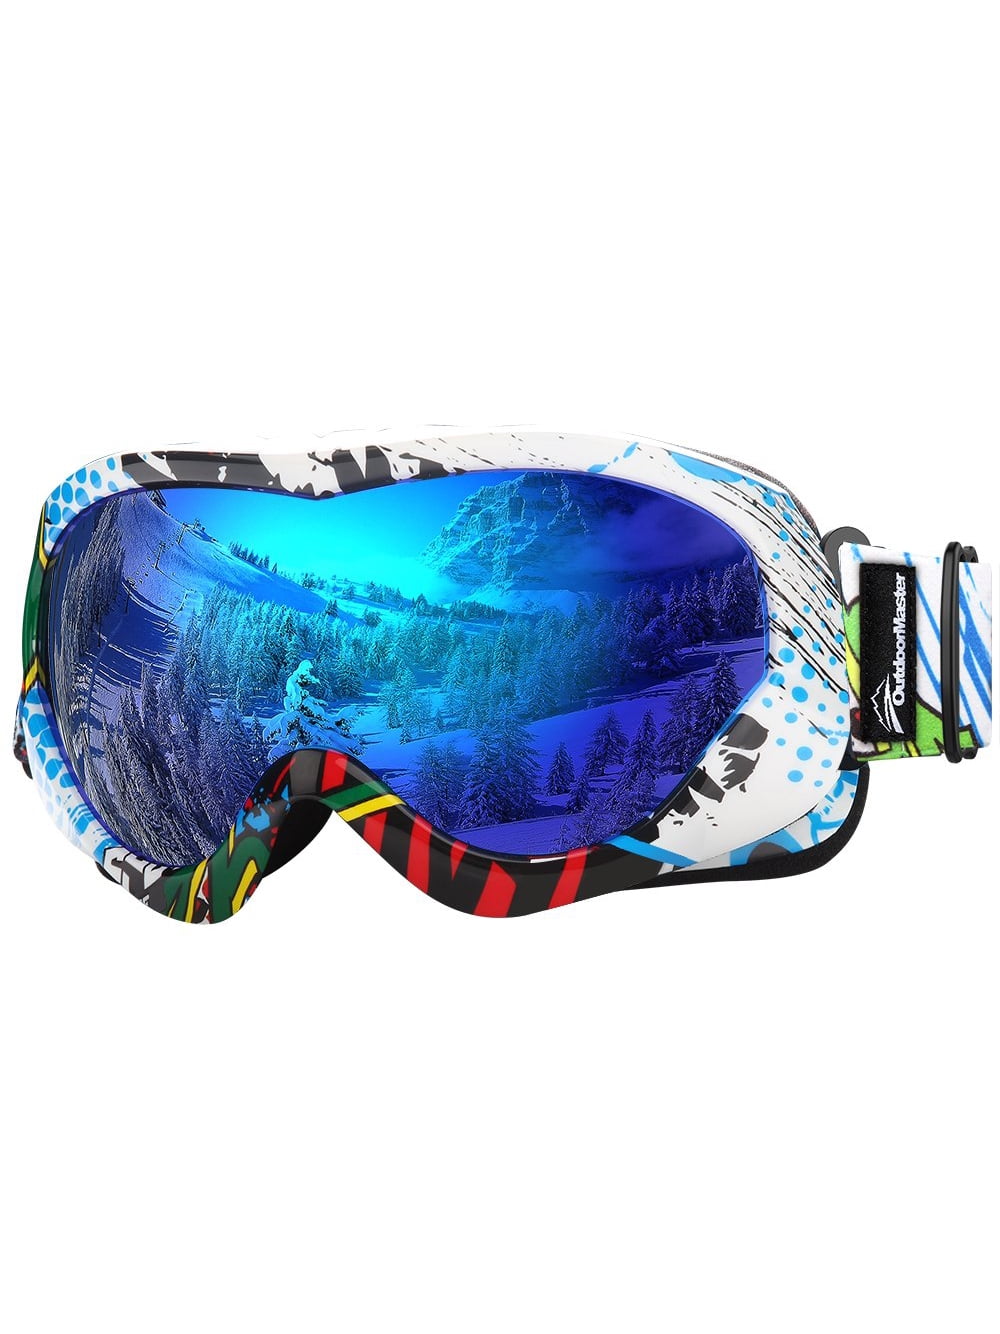 Snowboard Goggles for Men Youth Women Kids, MAMBAOUT 2-Pack Snow Ski Goggles 